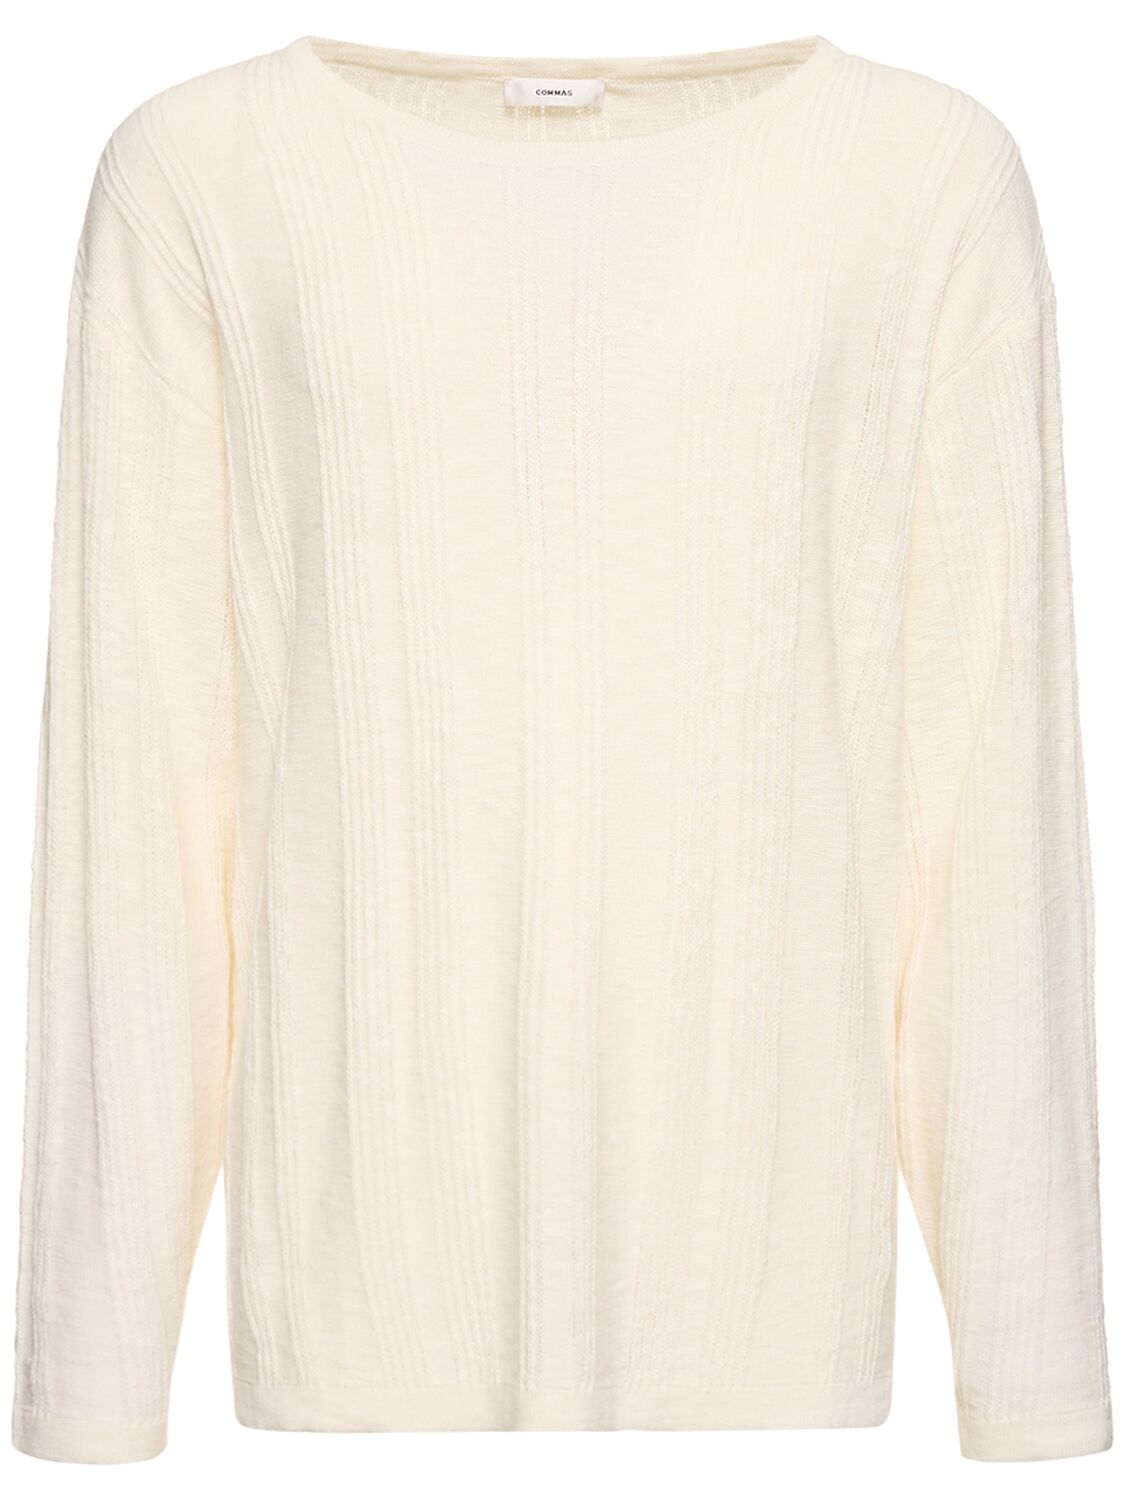 Commas Textured Knit Sweater In Off-white